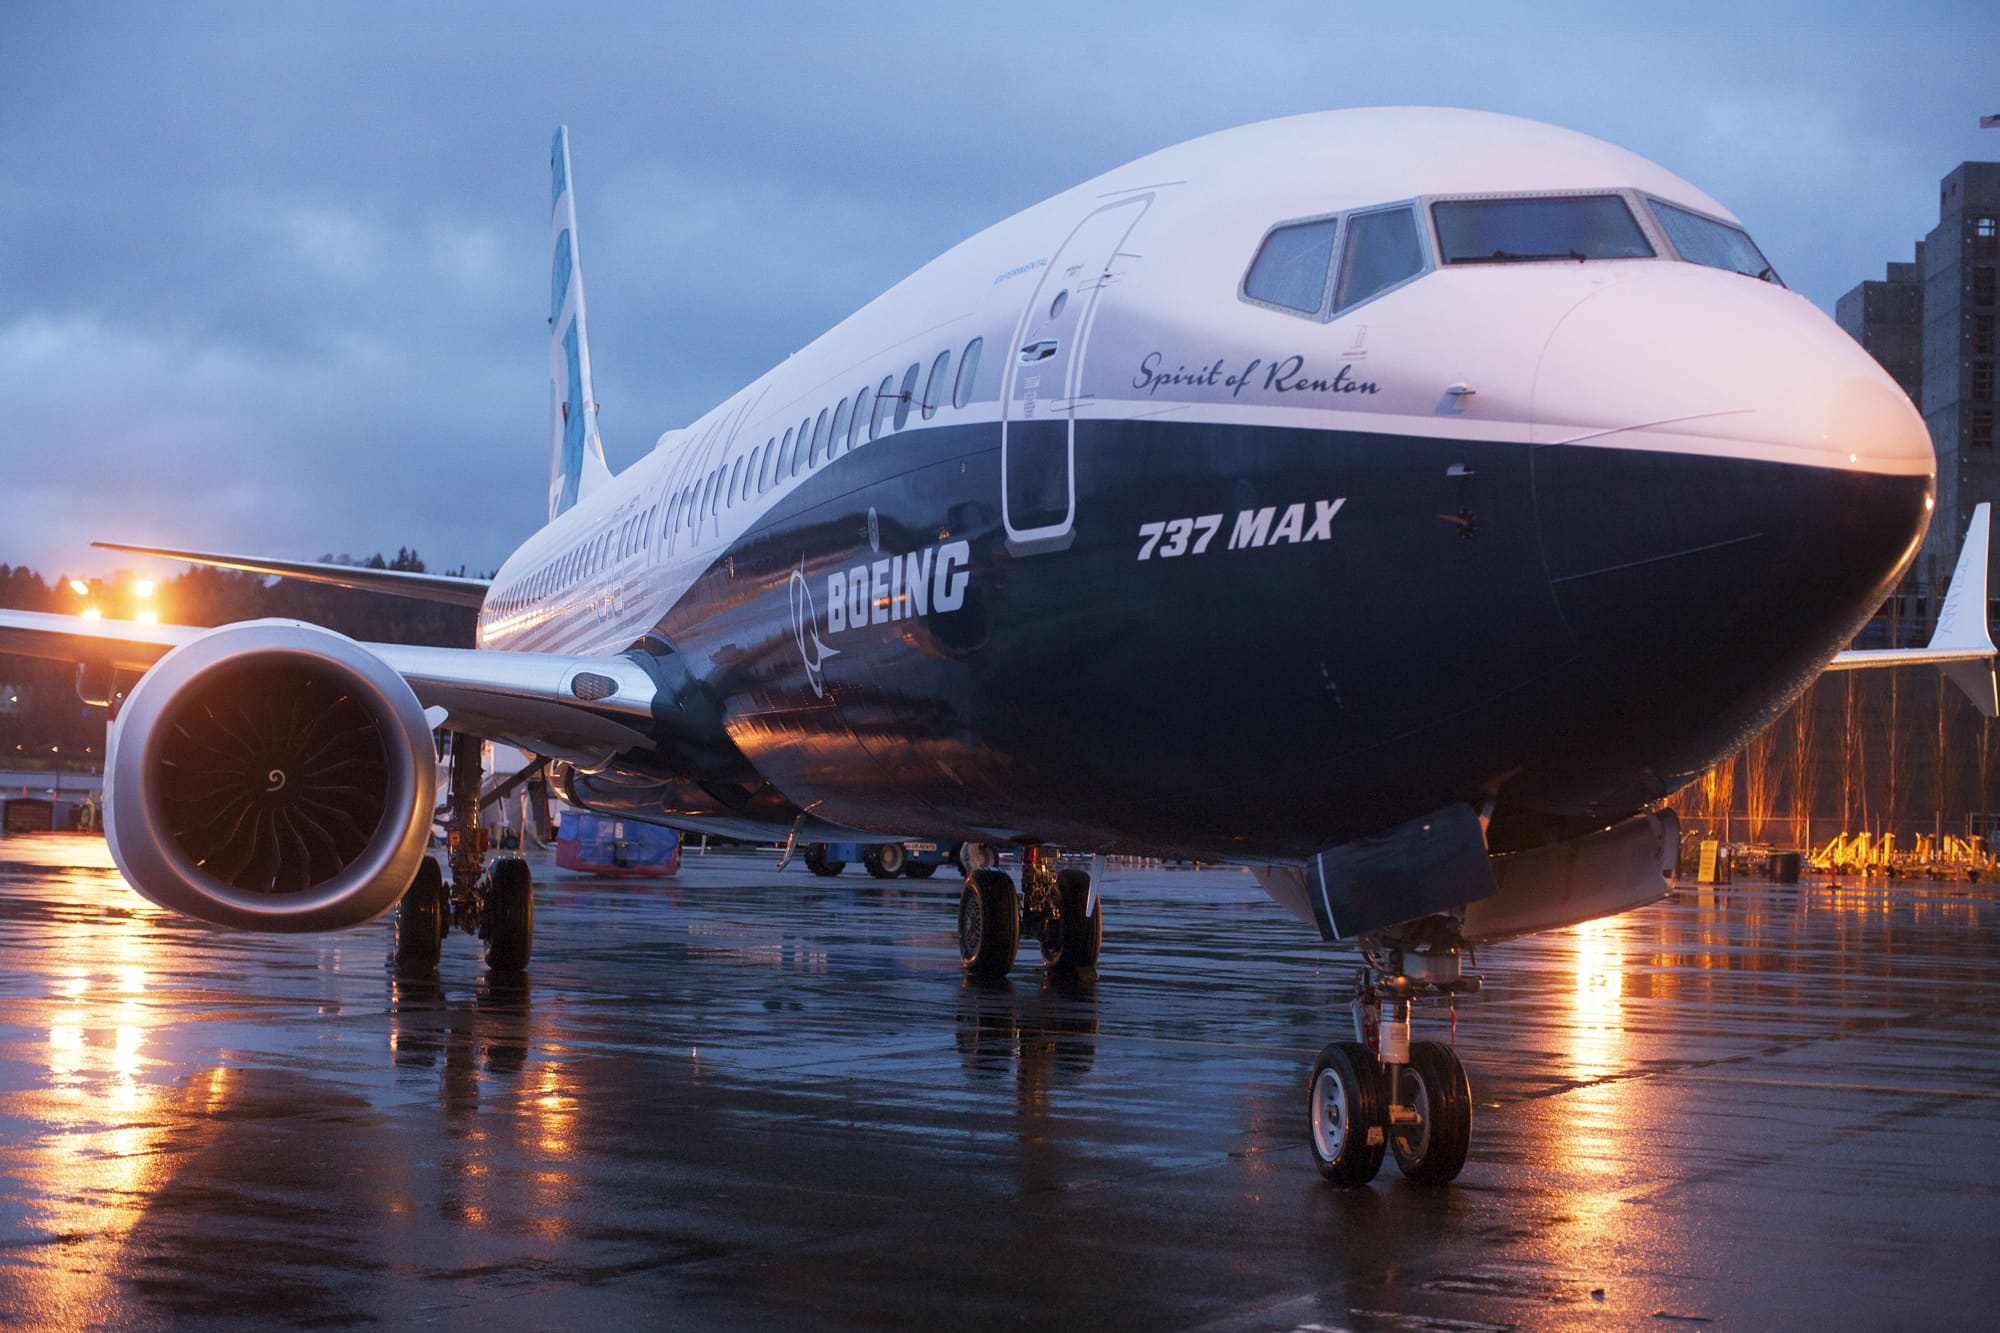 More sources have found electrical problems on some Boeing 737 Max